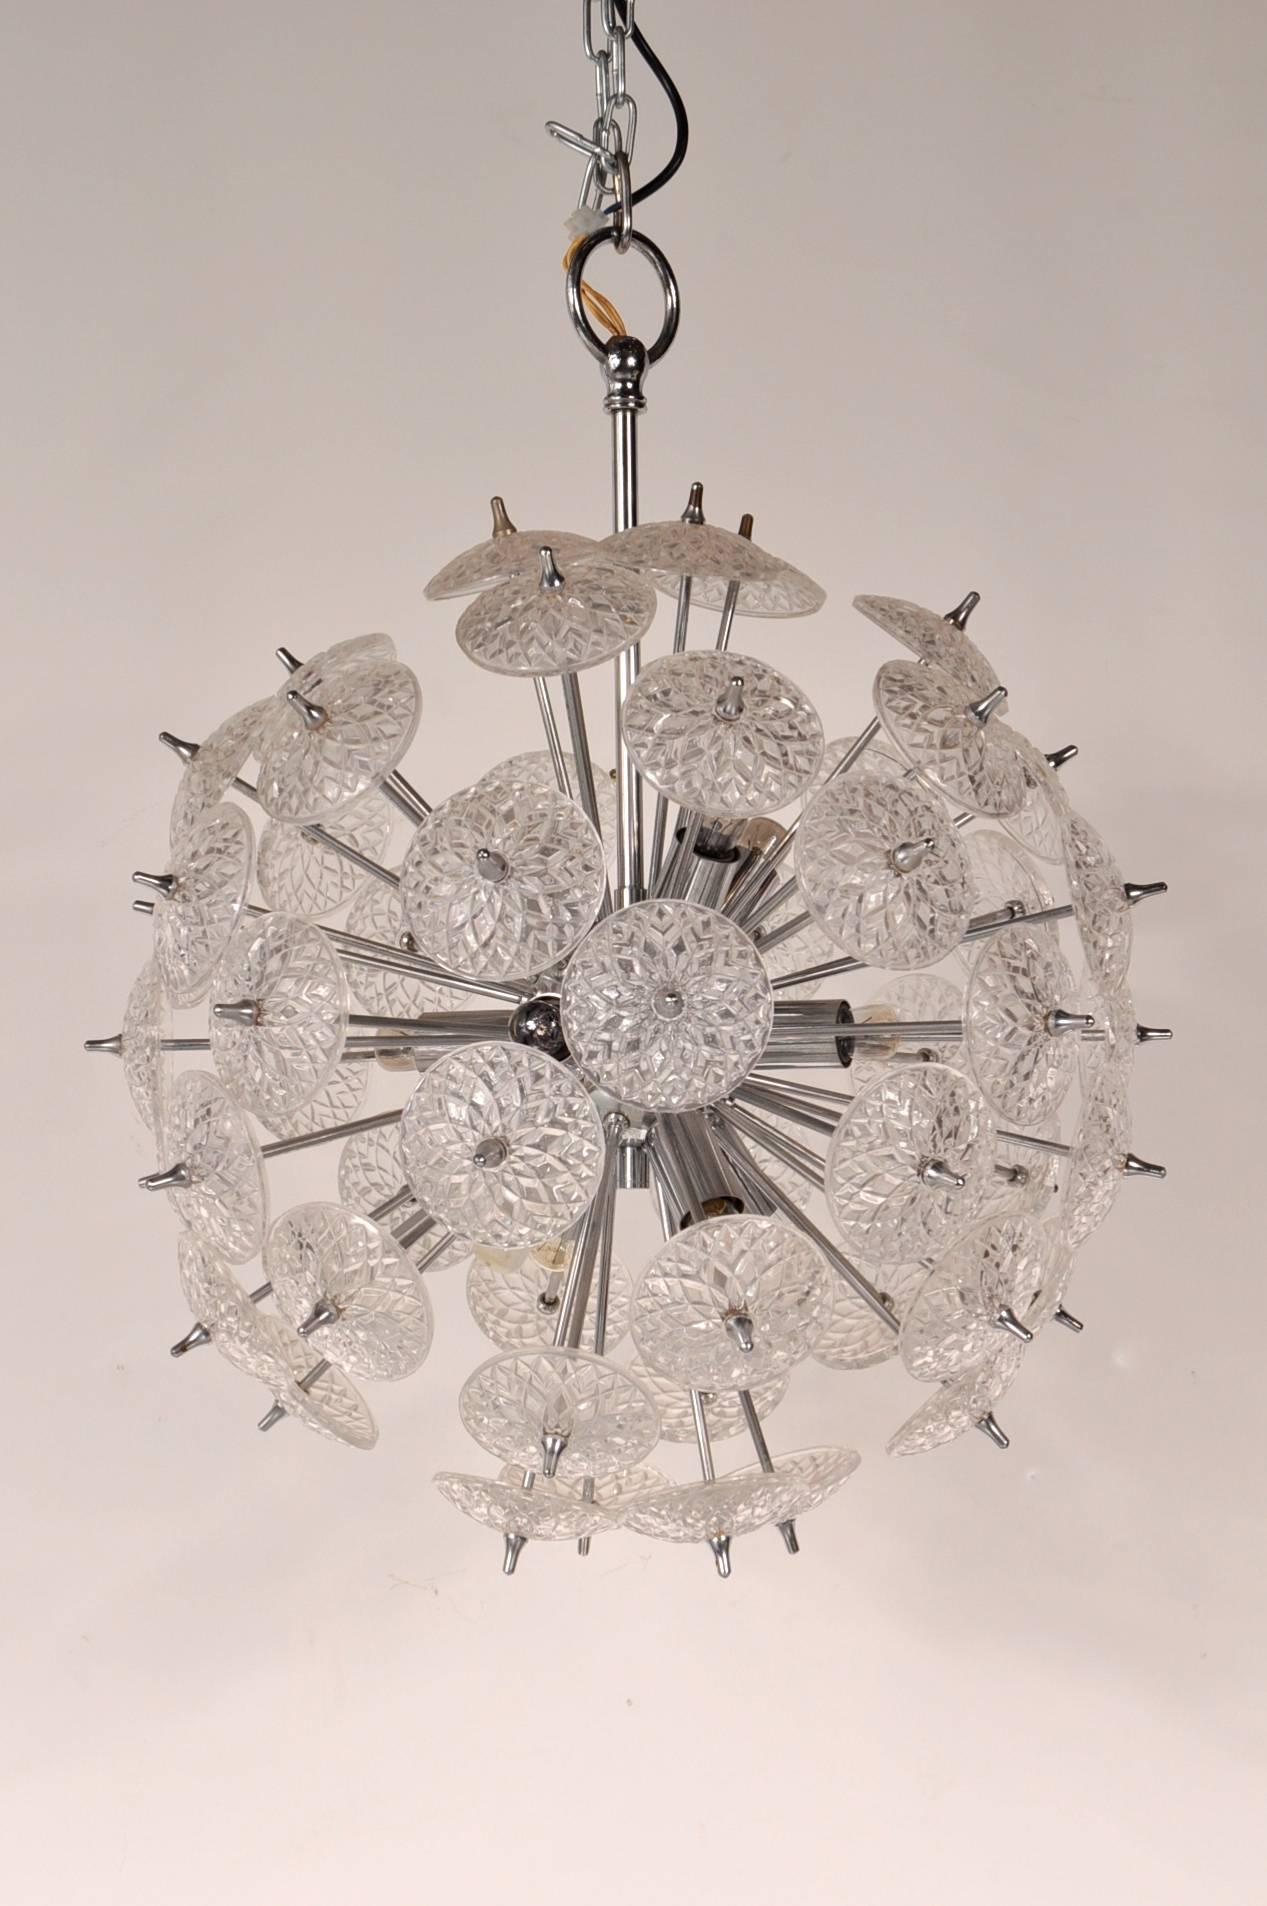 Eye-catching Sputnik chandelier in the style of Emil Stejnar, manufactured in Belgium, circa 1970.

This stunning piece has a high quality chrome metal base with crystal glass flowers on the ends of the many arms. The glass pieces are beautifully